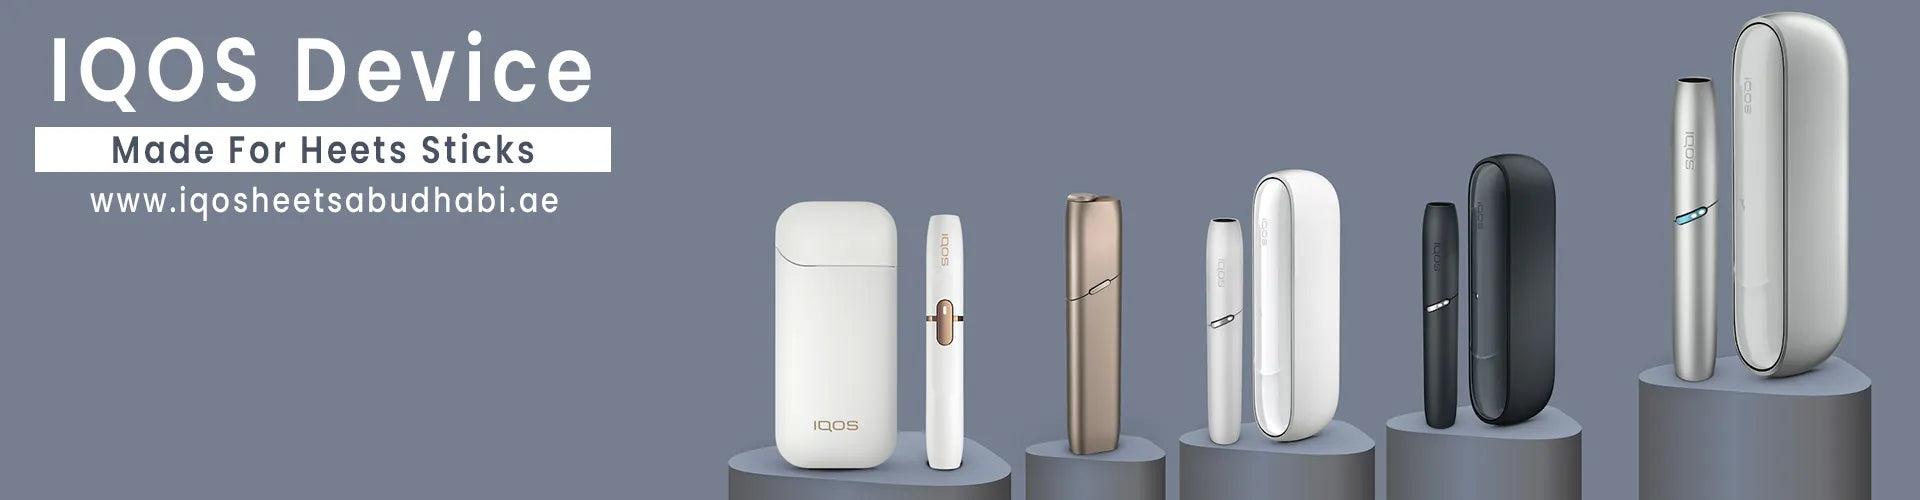 IQOS Devices for heets sticks in abu dhabi , uae